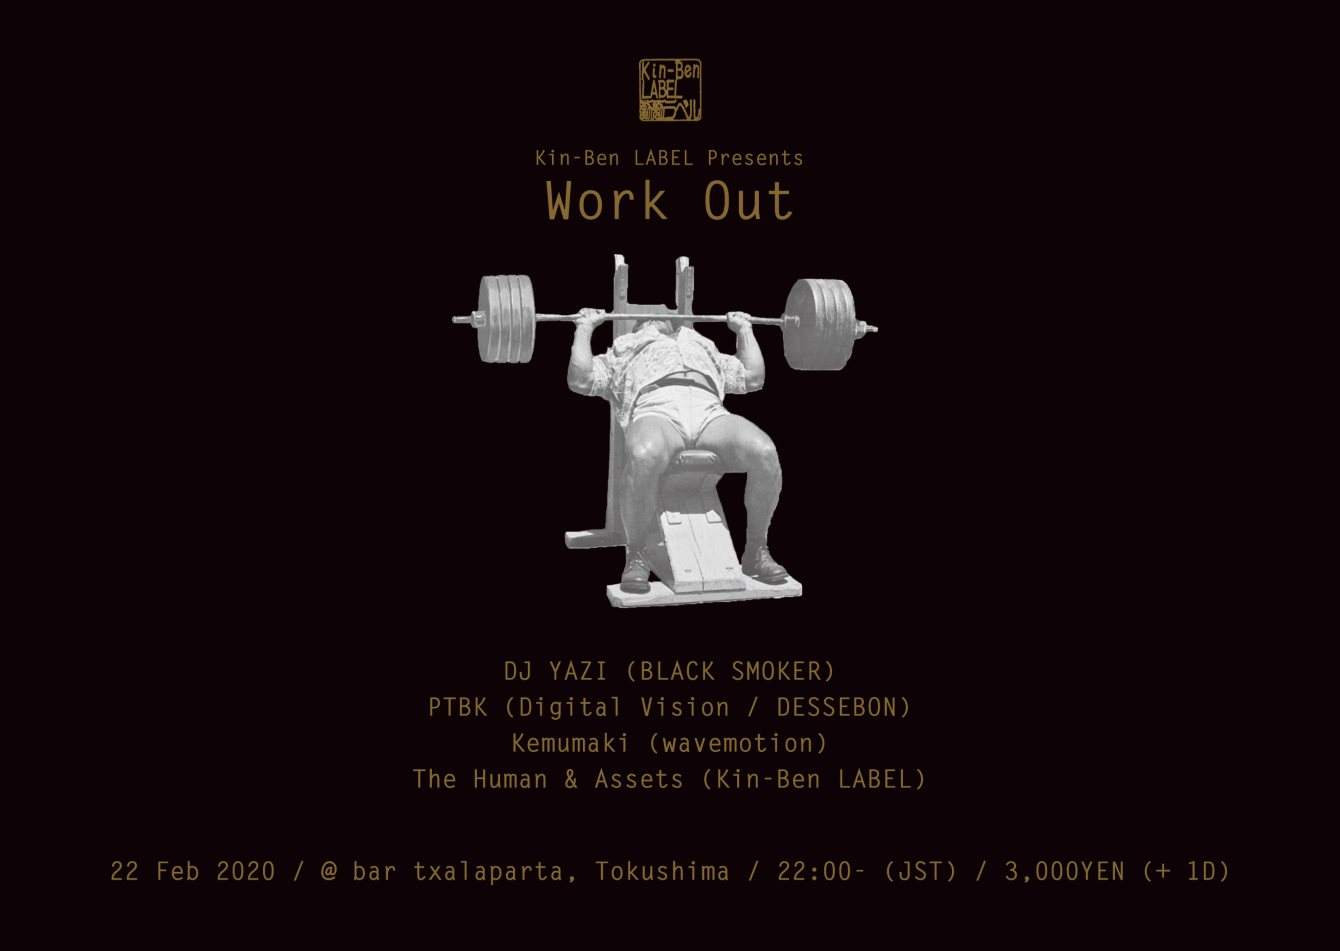 Kin-Ben Label presents Work Out - フライヤー表